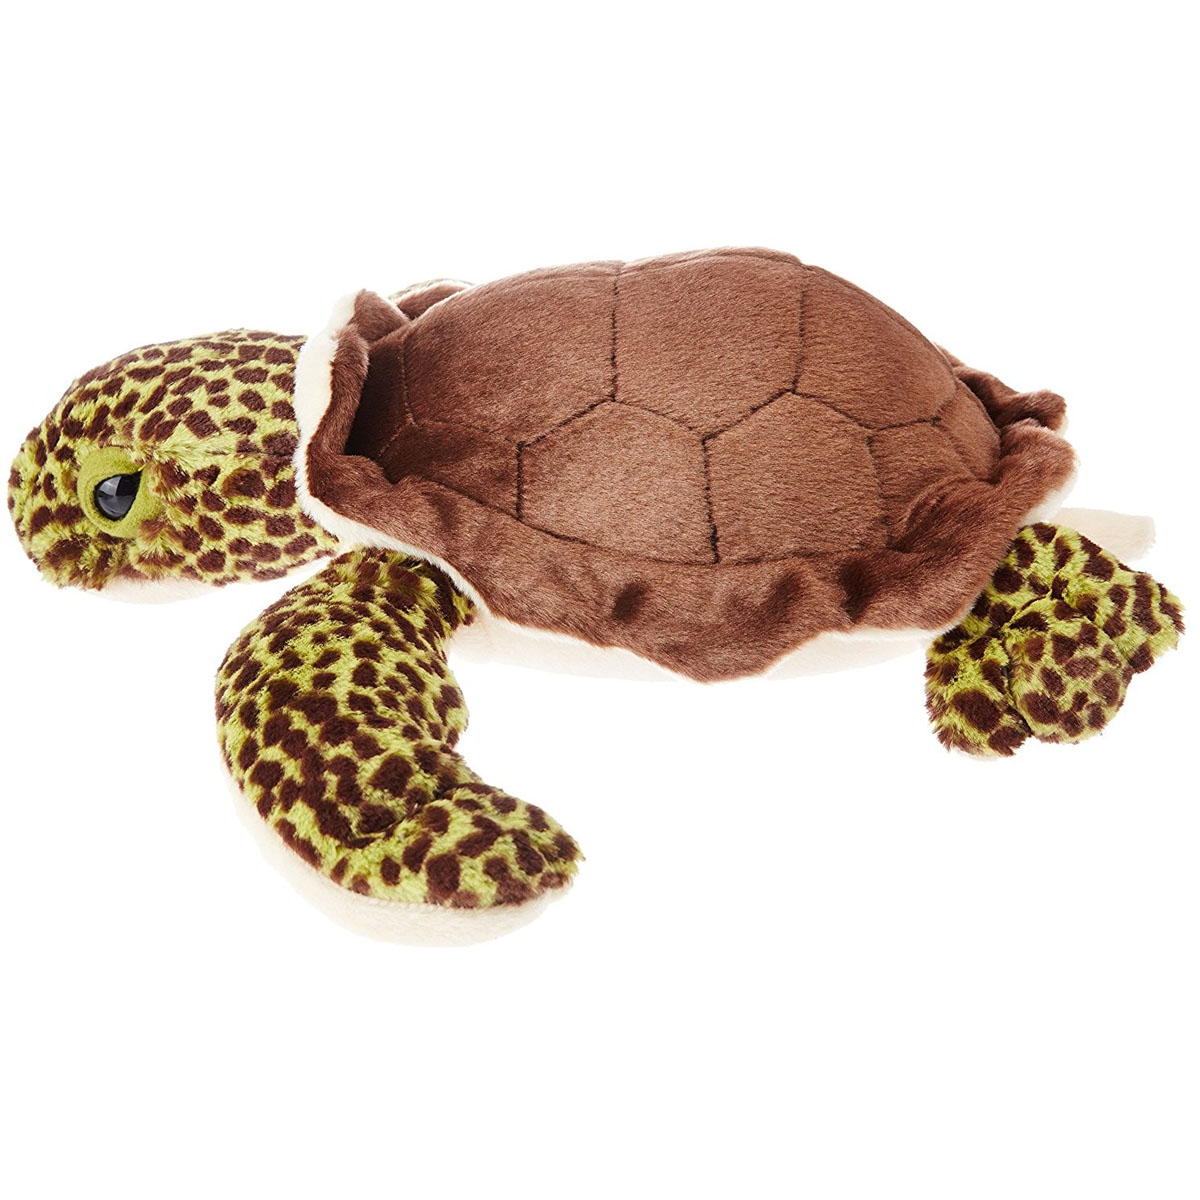 Wild Republic Turtle Soft Toy for Kids- 12 Inches